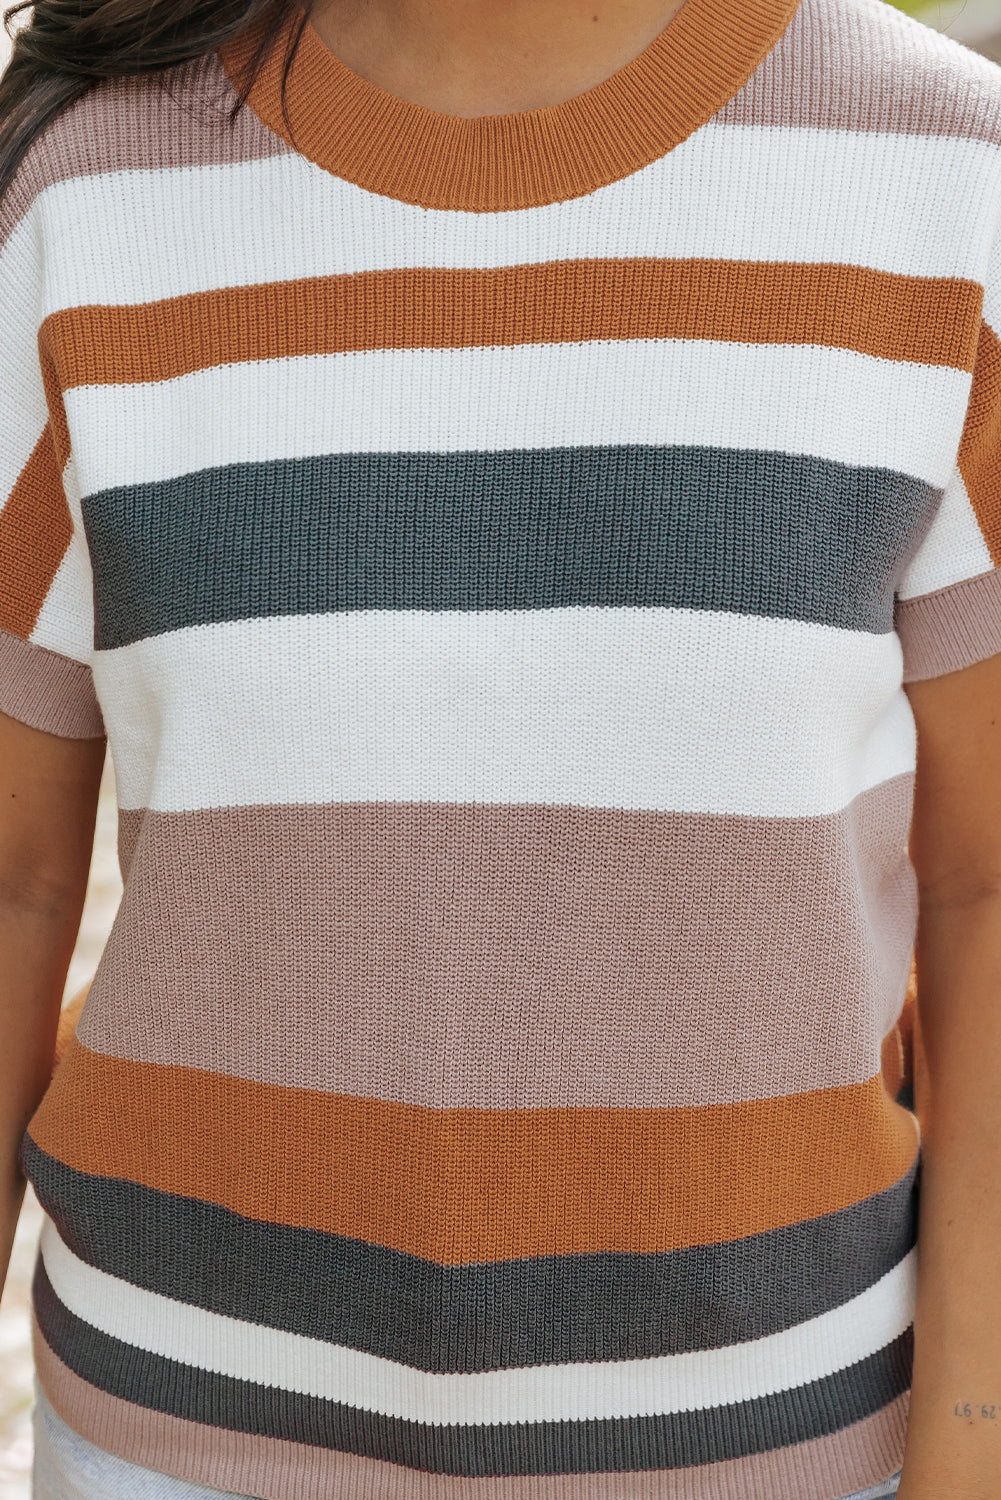 Camel Striped Knit Crew Neck T Shirt Sweater